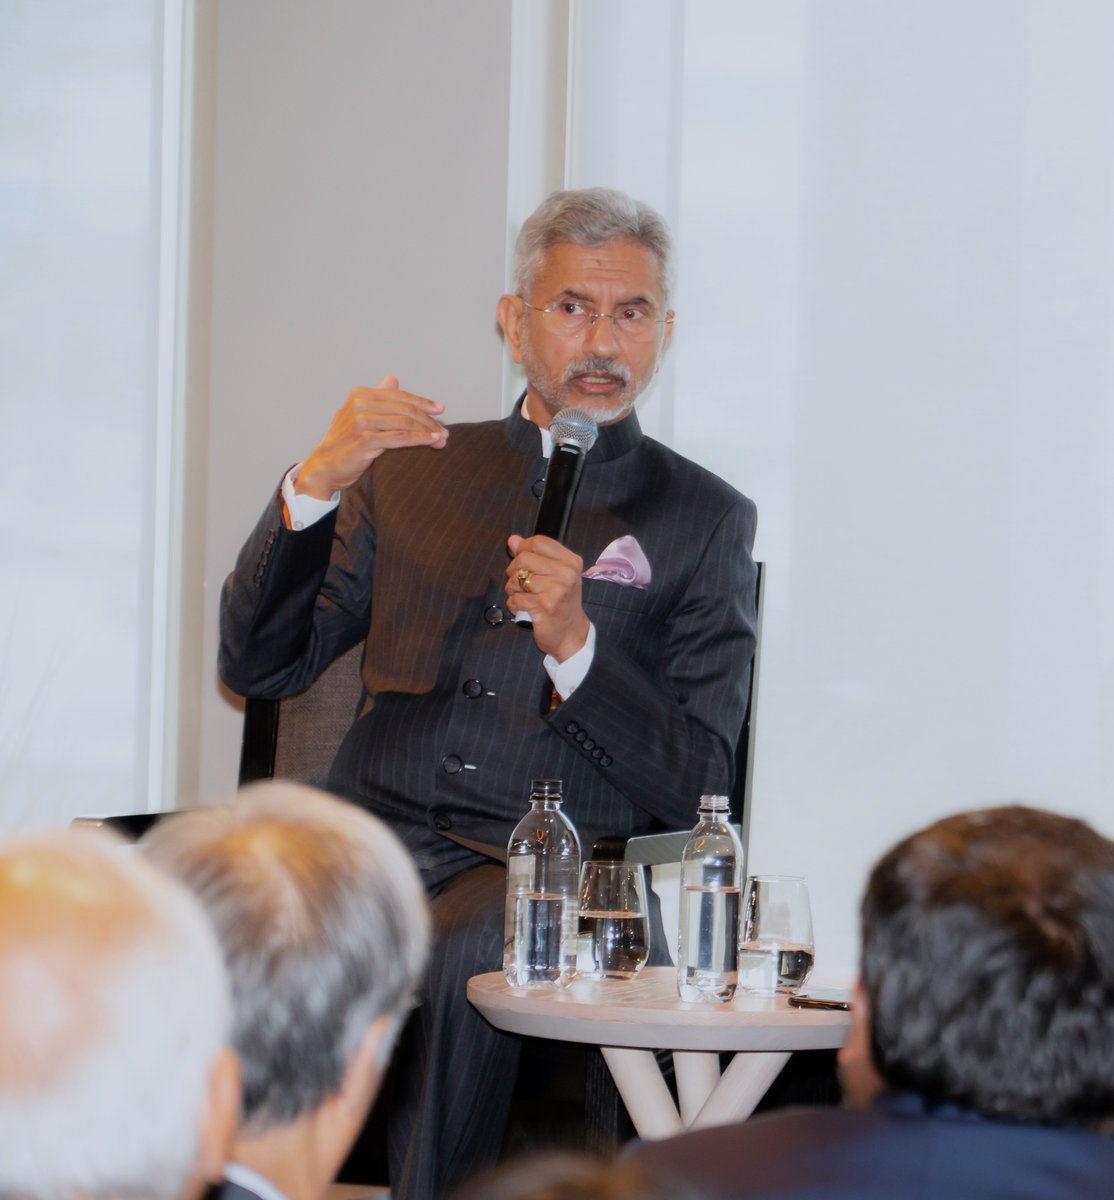 EAM @DrSJaishankar spoke at different platforms during his visit to New Zealand. The Minister addressed various bilateral and multilateral issues, including student visa. @MEAIndia @IndianDiplomacy @MFATNZ @DDIndialive @BhavDhillonnz @indianweekender @AmritMahotsav @iccr_hq